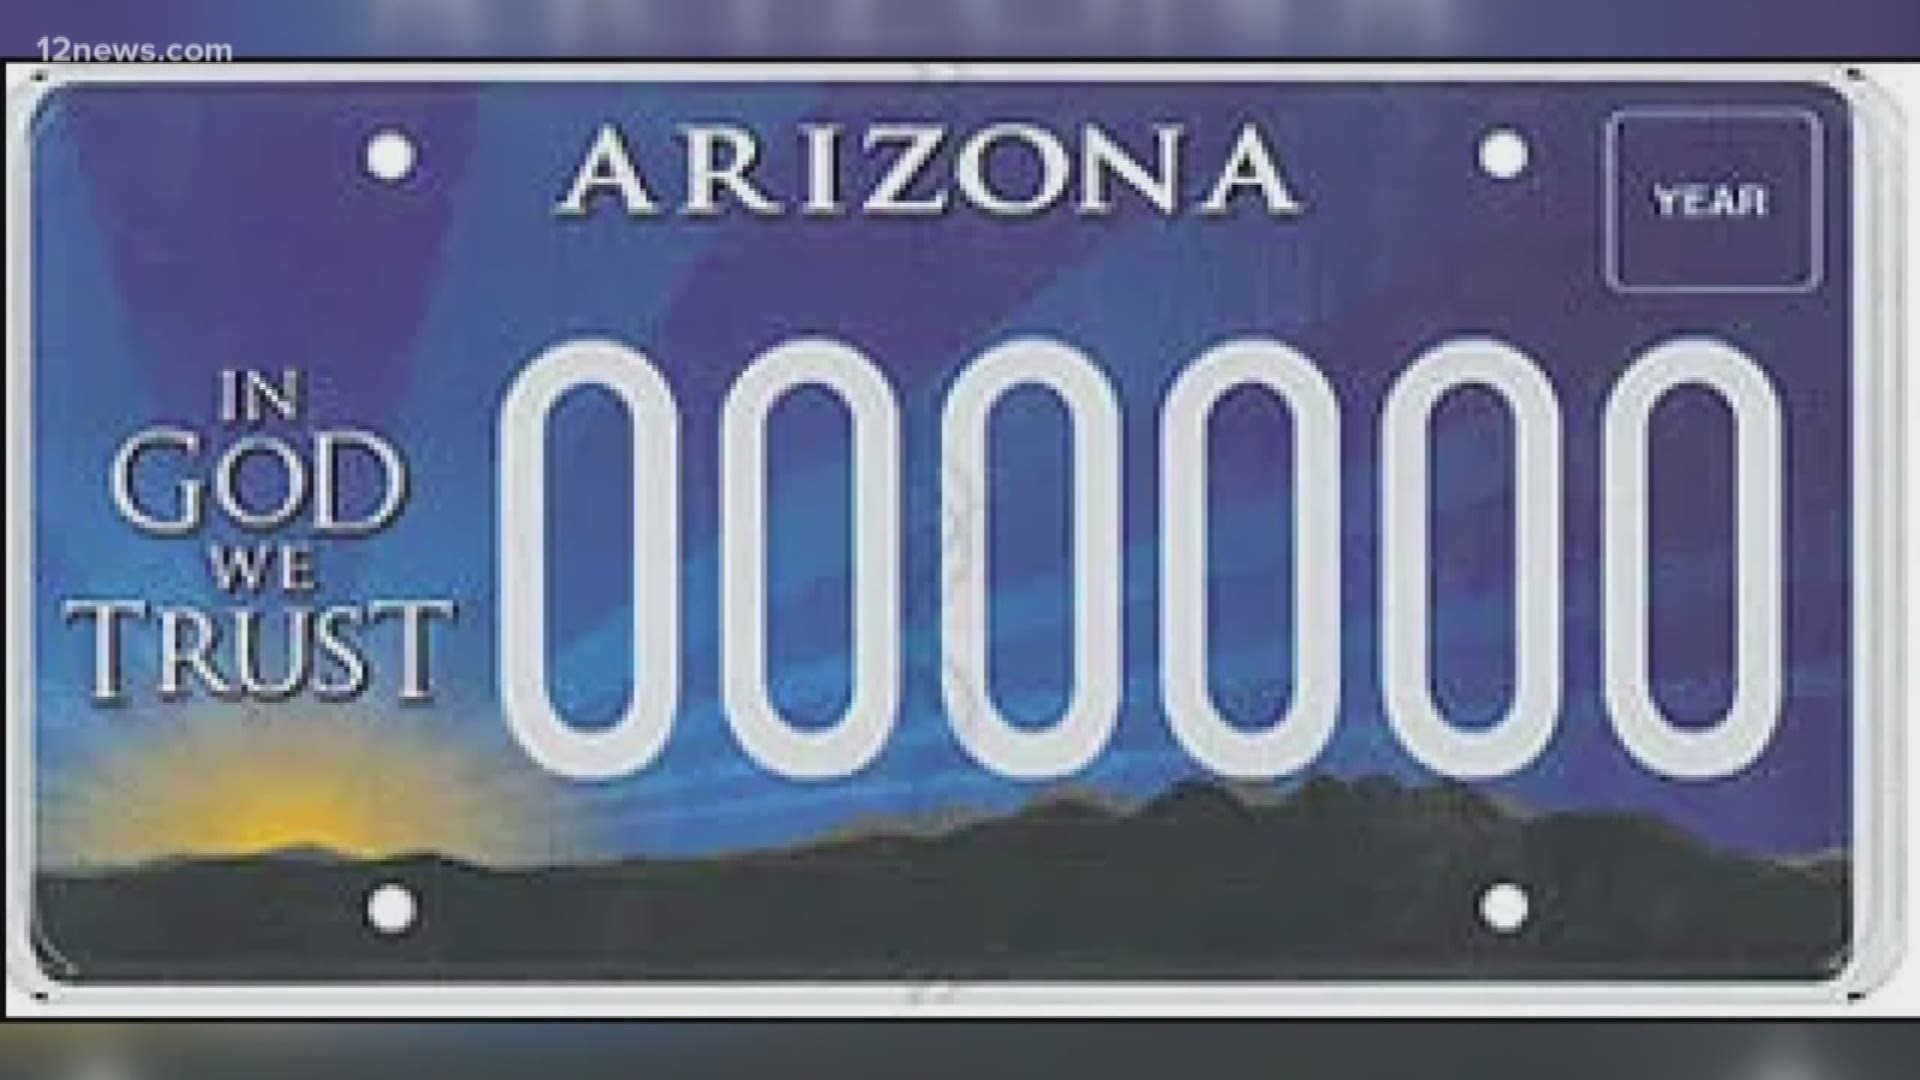 Payments for Arizona's "In God We Trust" license plate go to the Alliance Defending Freedom, a major opponent of LGBTQ rights.